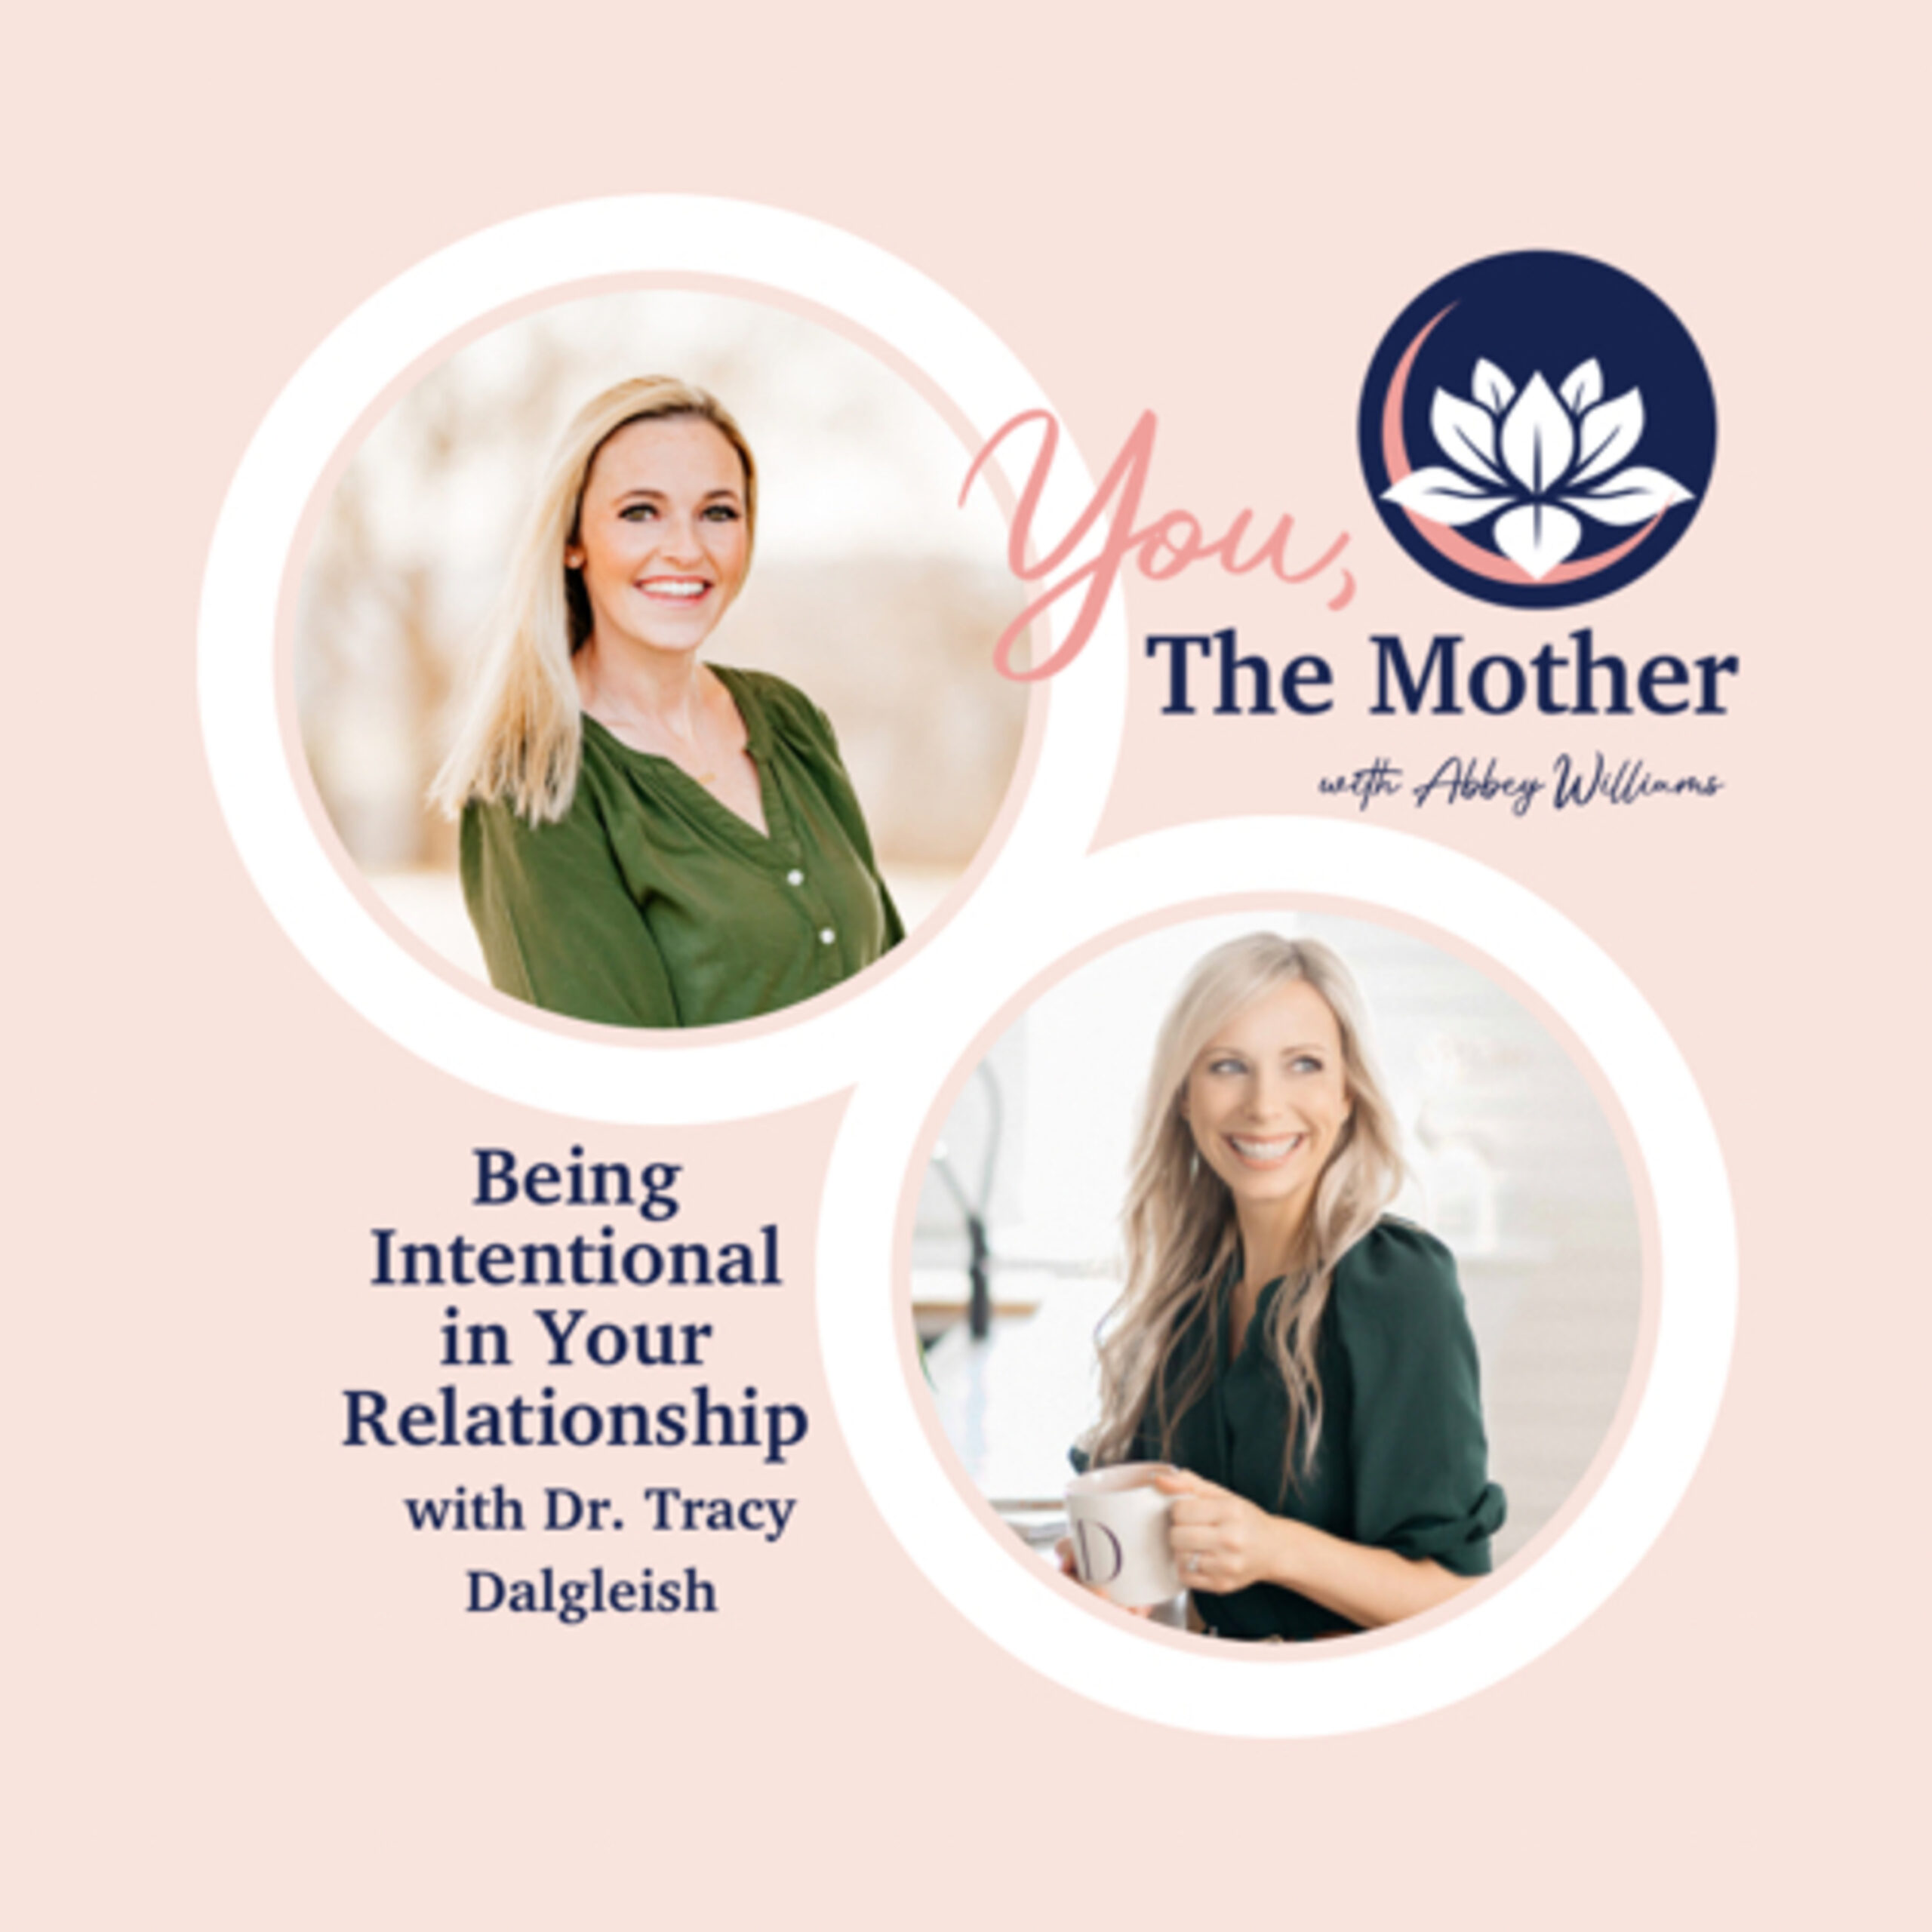 Being Intentional in Your Relationship with Dr. Tracy Dalgleish